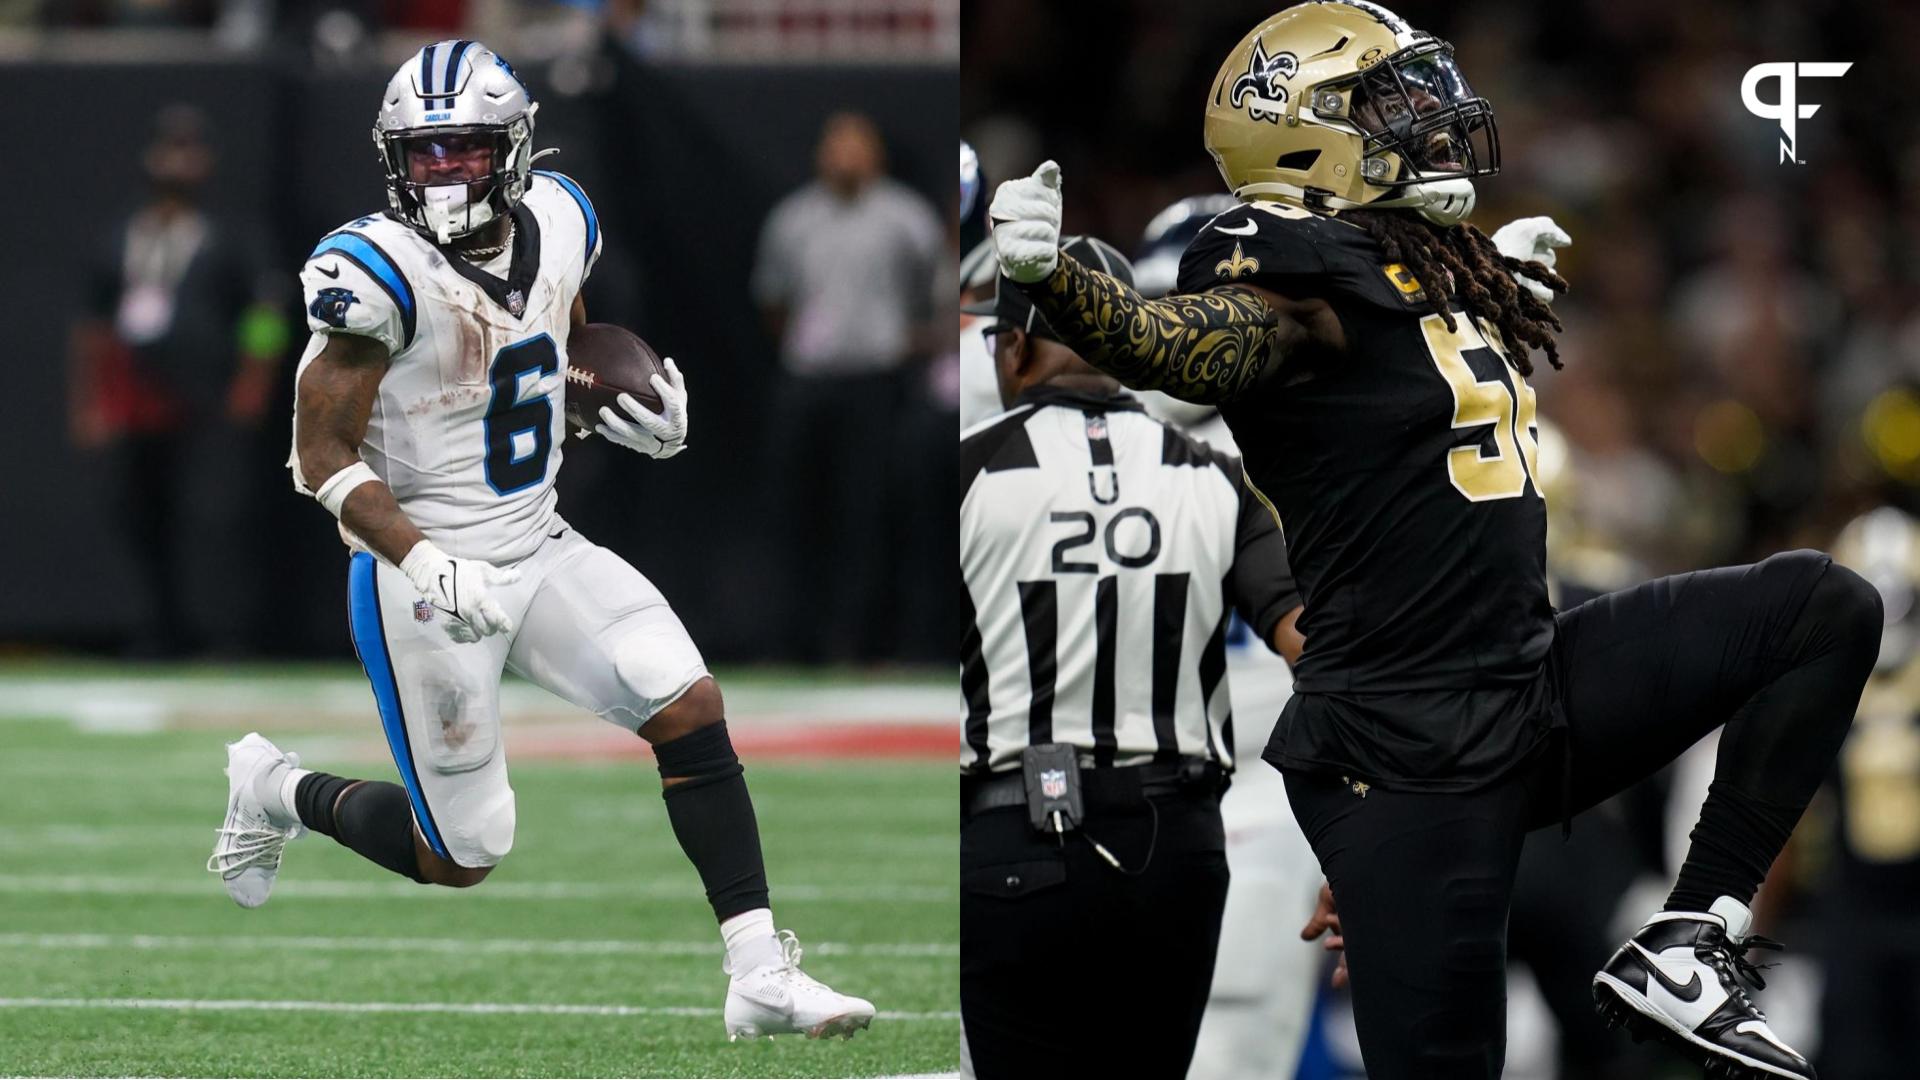 Saints vs. Panthers Live Scores and Highlights: Updates, Score, Results,  and More From Monday Night Football Matchup